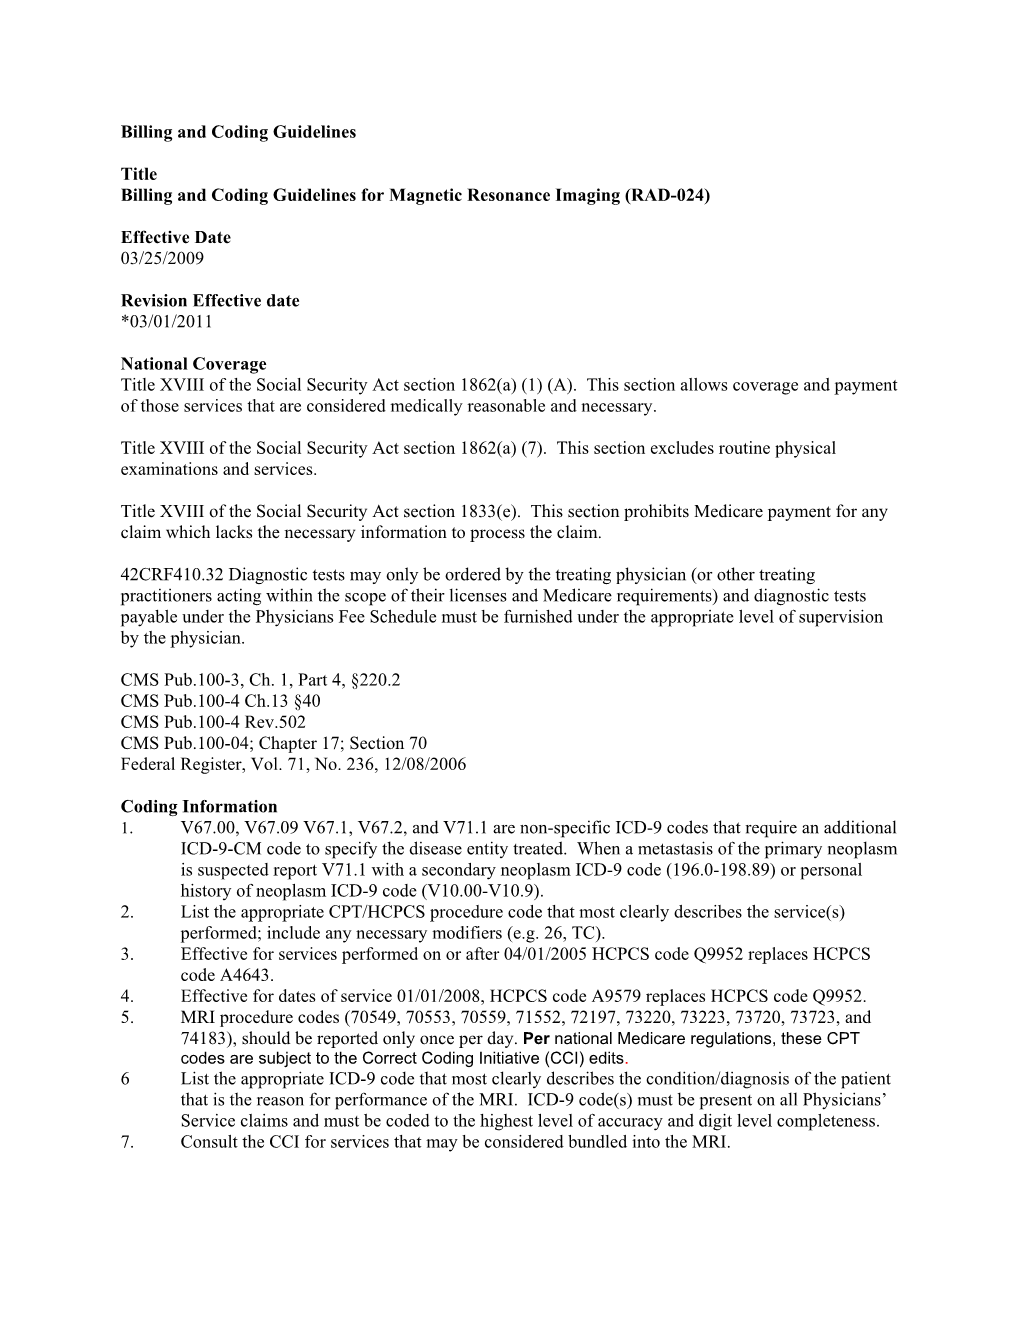 Billing and Coding Guidelines for Magnetic Resonance Imaging (RAD-024)